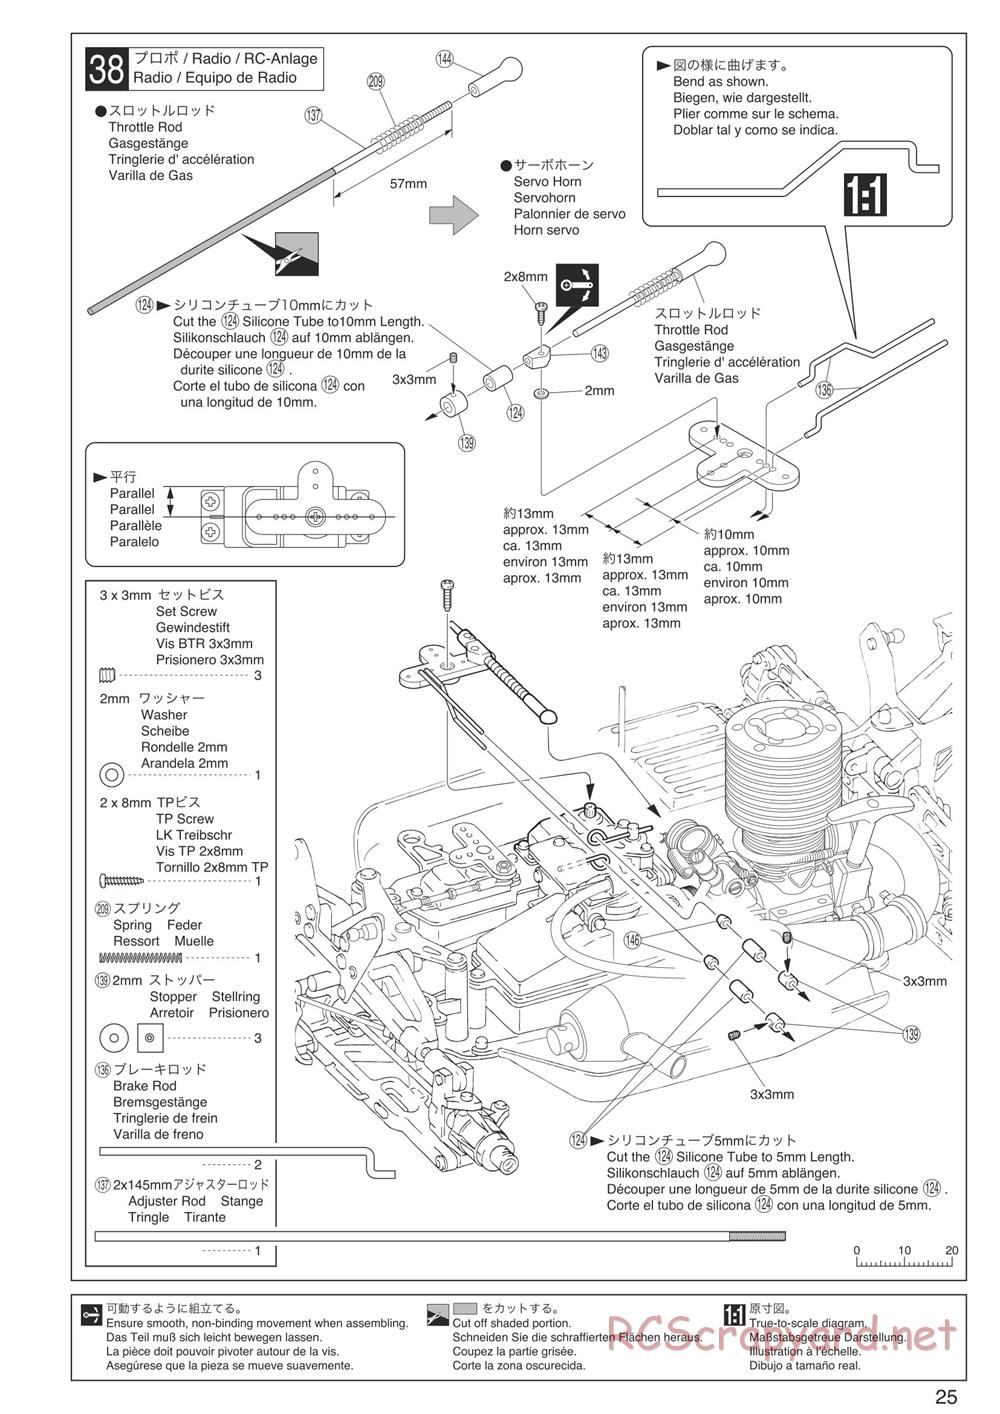 Kyosho - Inferno Neo Race Spec - Manual - Page 25